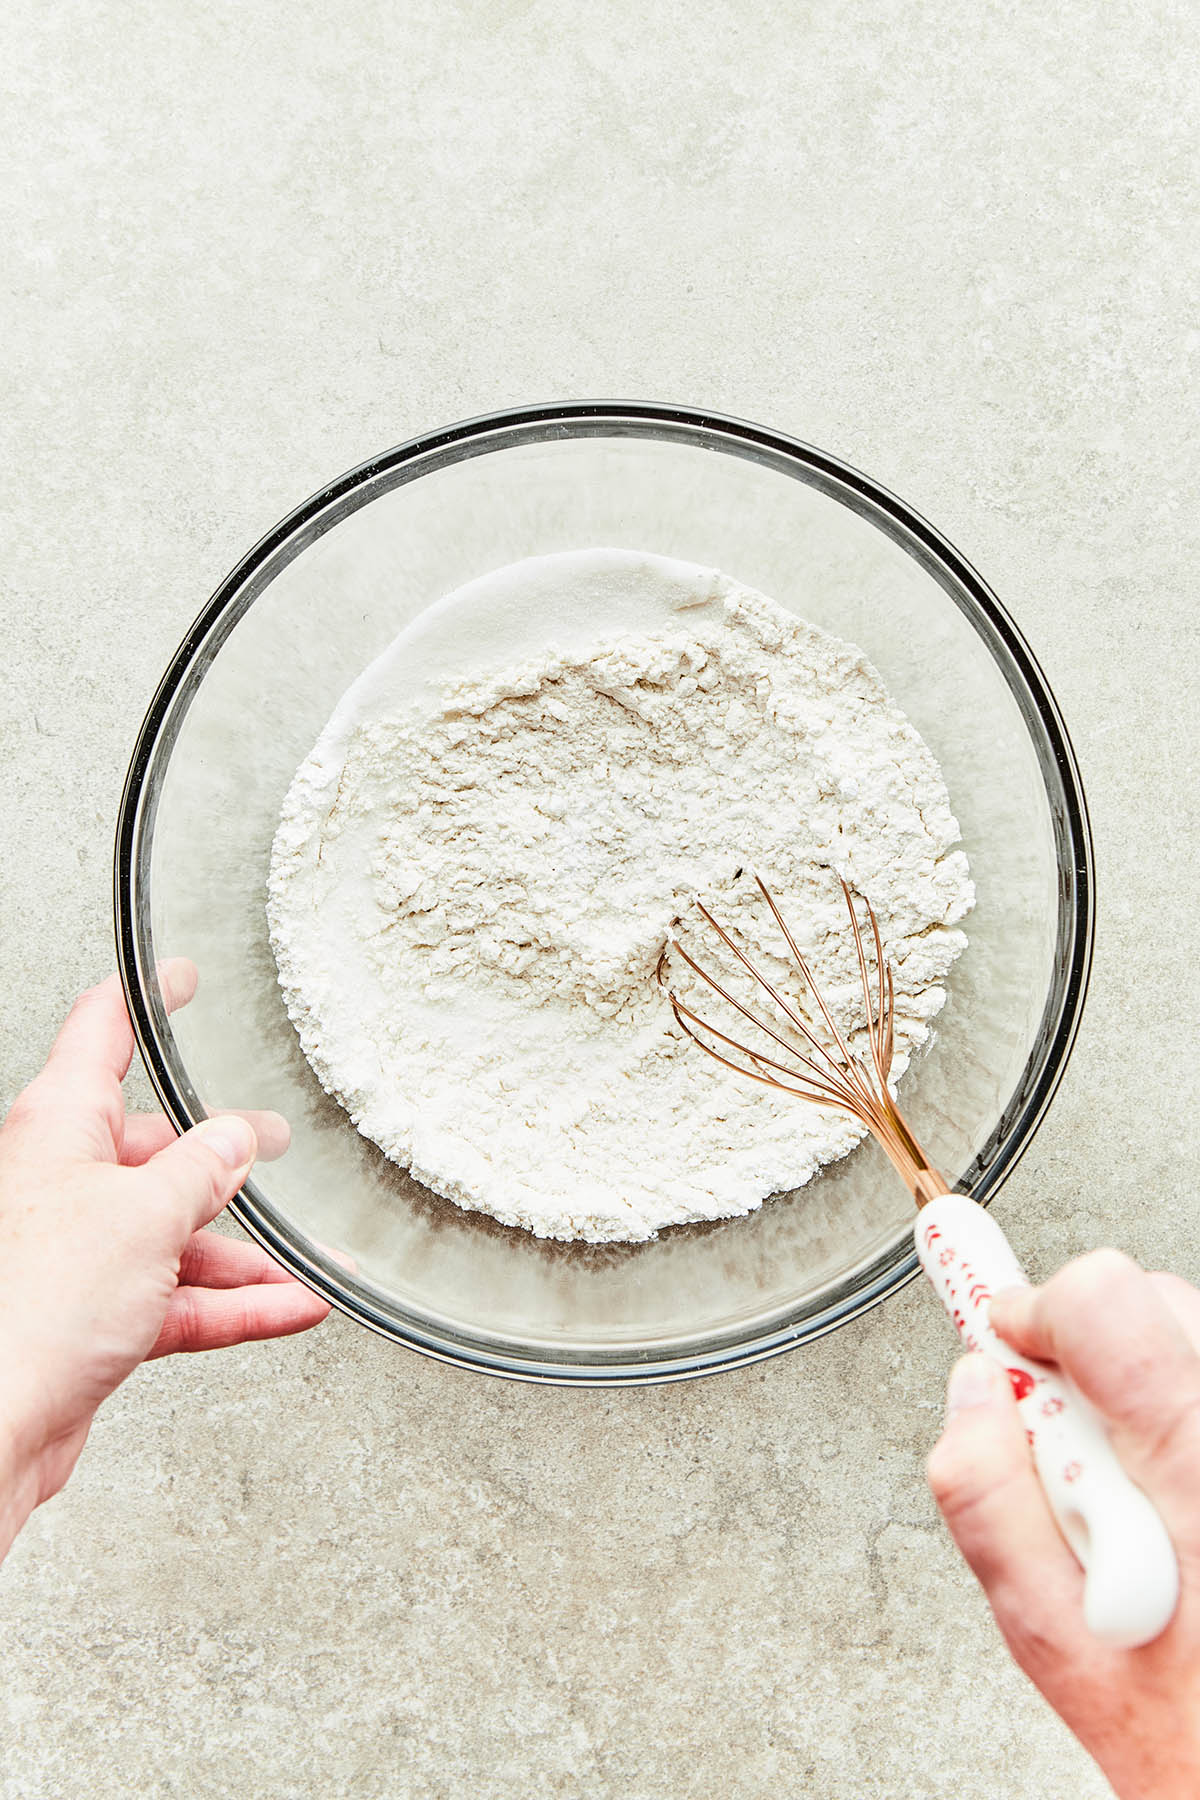 A hand using a whisk to mix dry ingredients in a large glass bowl.